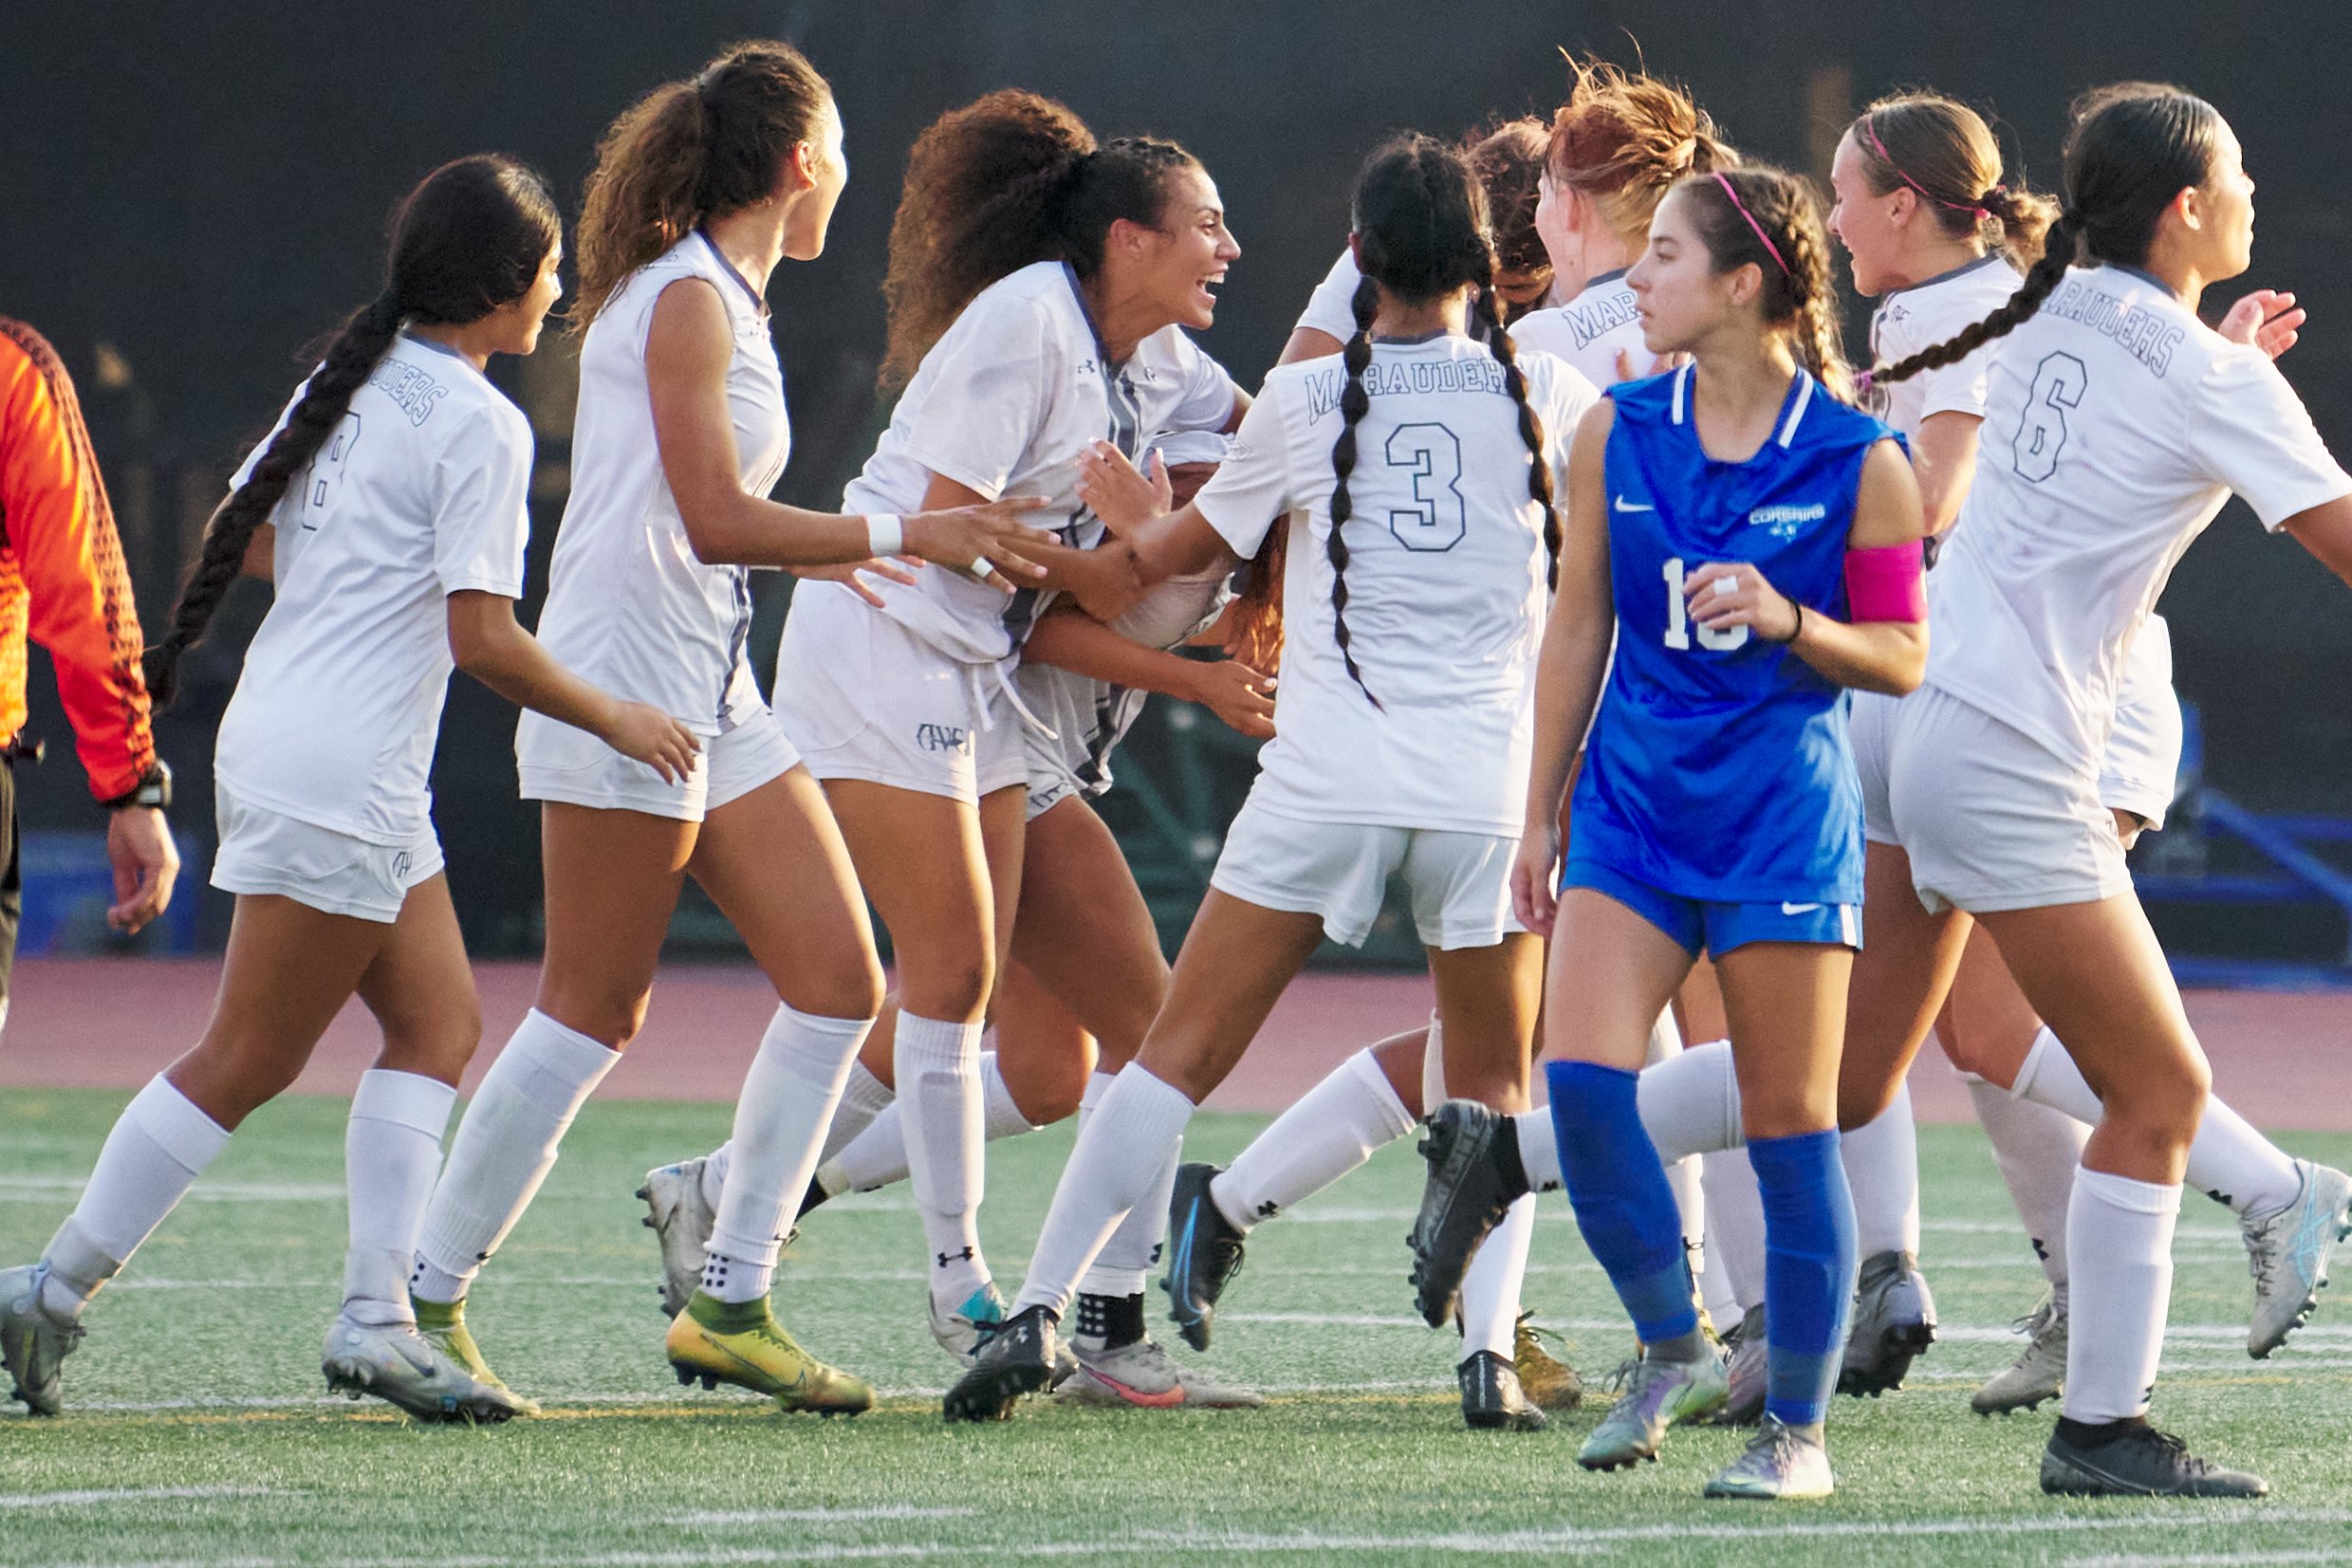  Members of the Antelope Valley College Marauders pass Santa Monica College Corsairs' Sophie Doumitt (in blue) as they celebrate their second goal of the women's soccer match on Tuesday, Oct. 11, 2022, at Corsair Field in Santa Monica, Calif. The Cor